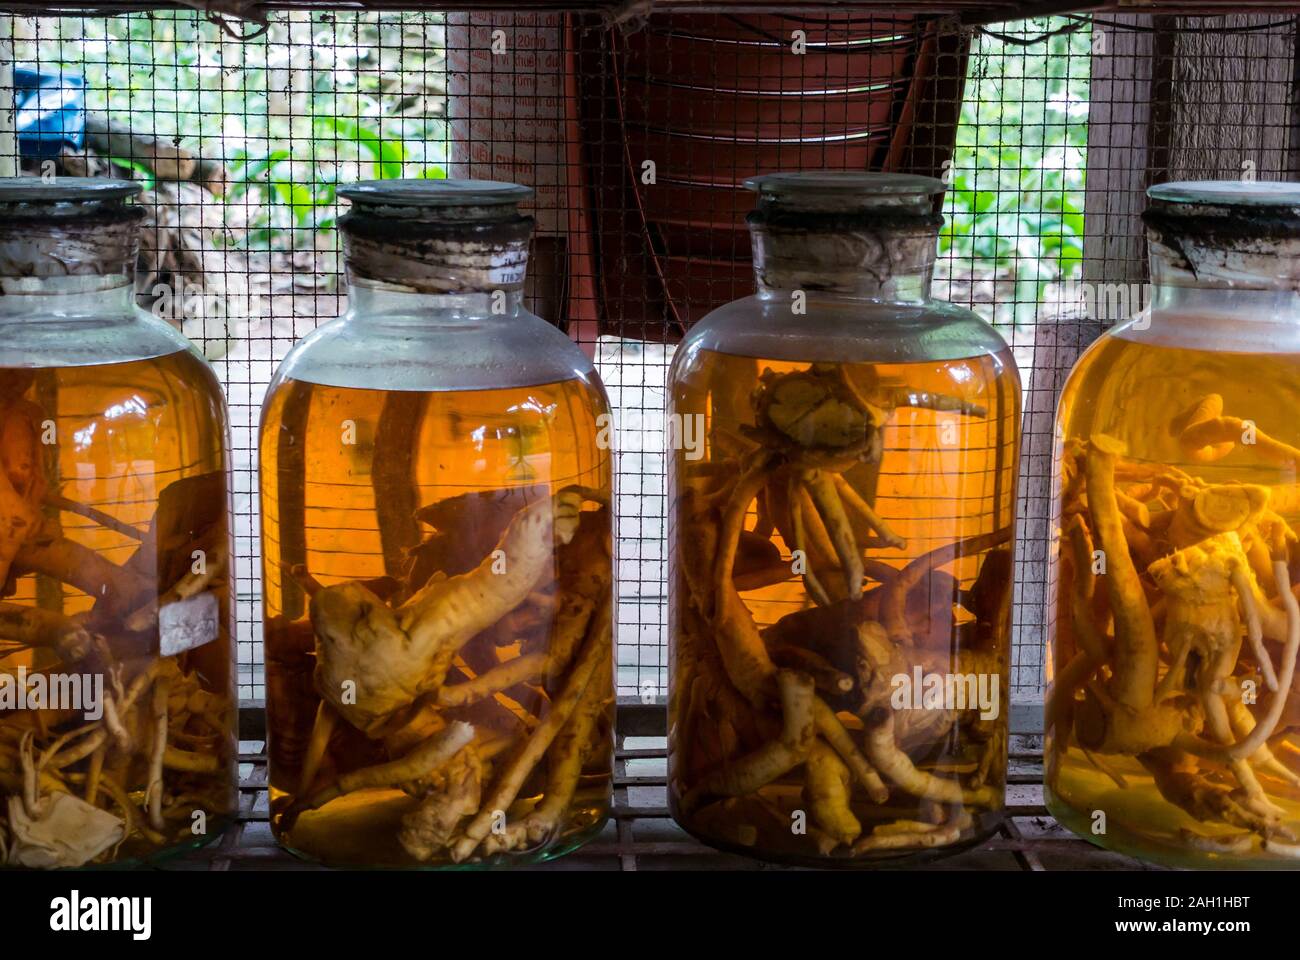 Plant roots pickled & preserved in glass jars, Thai Hai ethnic village traditional way of life, Thai Nguyen province, Northern Vietnam, Asia Stock Photo